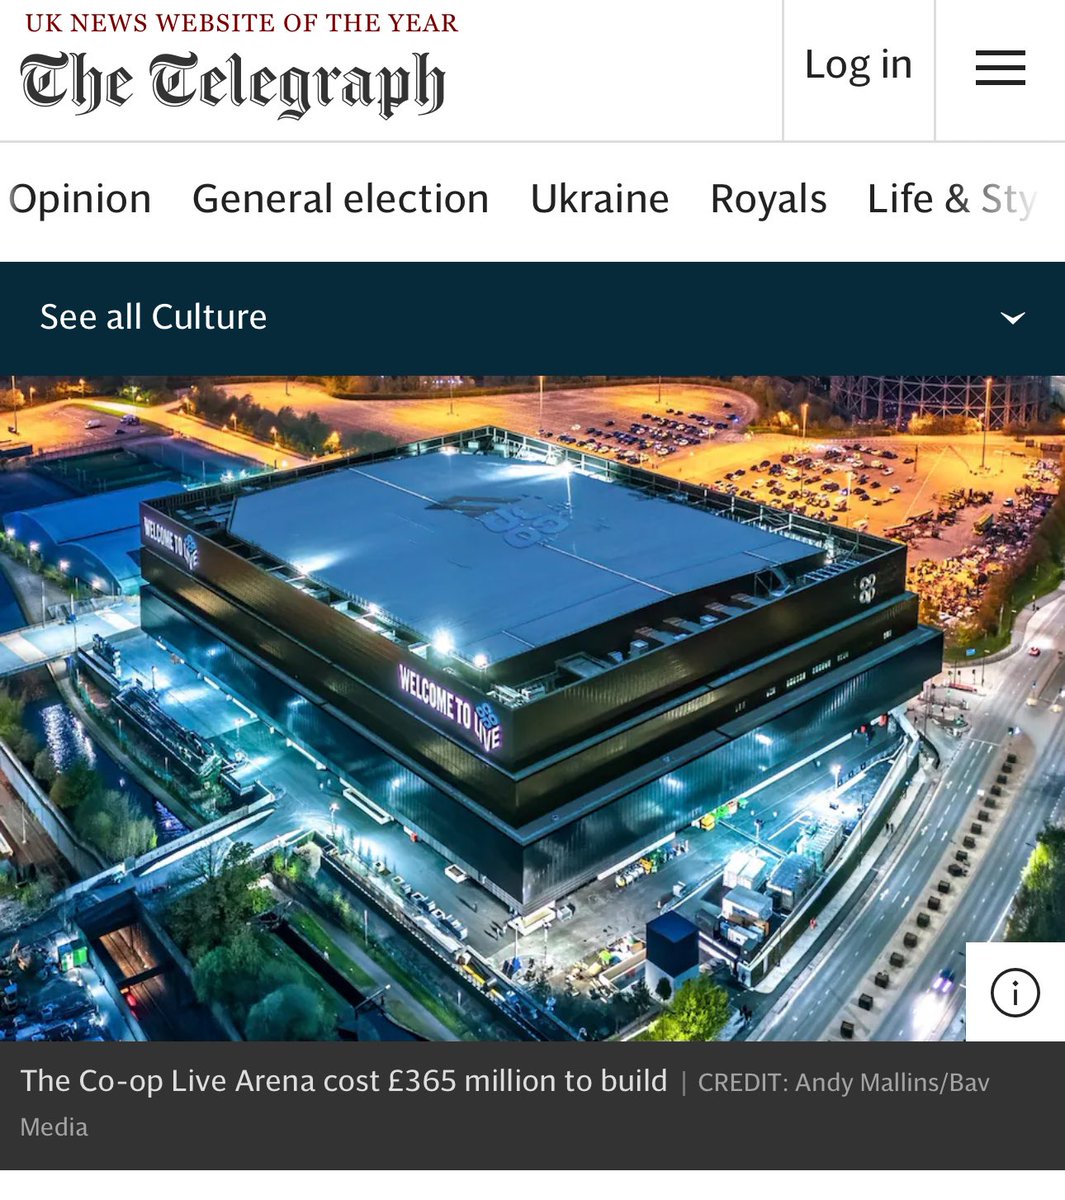 The image of the @TheCoopLive I took on Saturday night was featured in the @Telegraph earlier this week ☺️